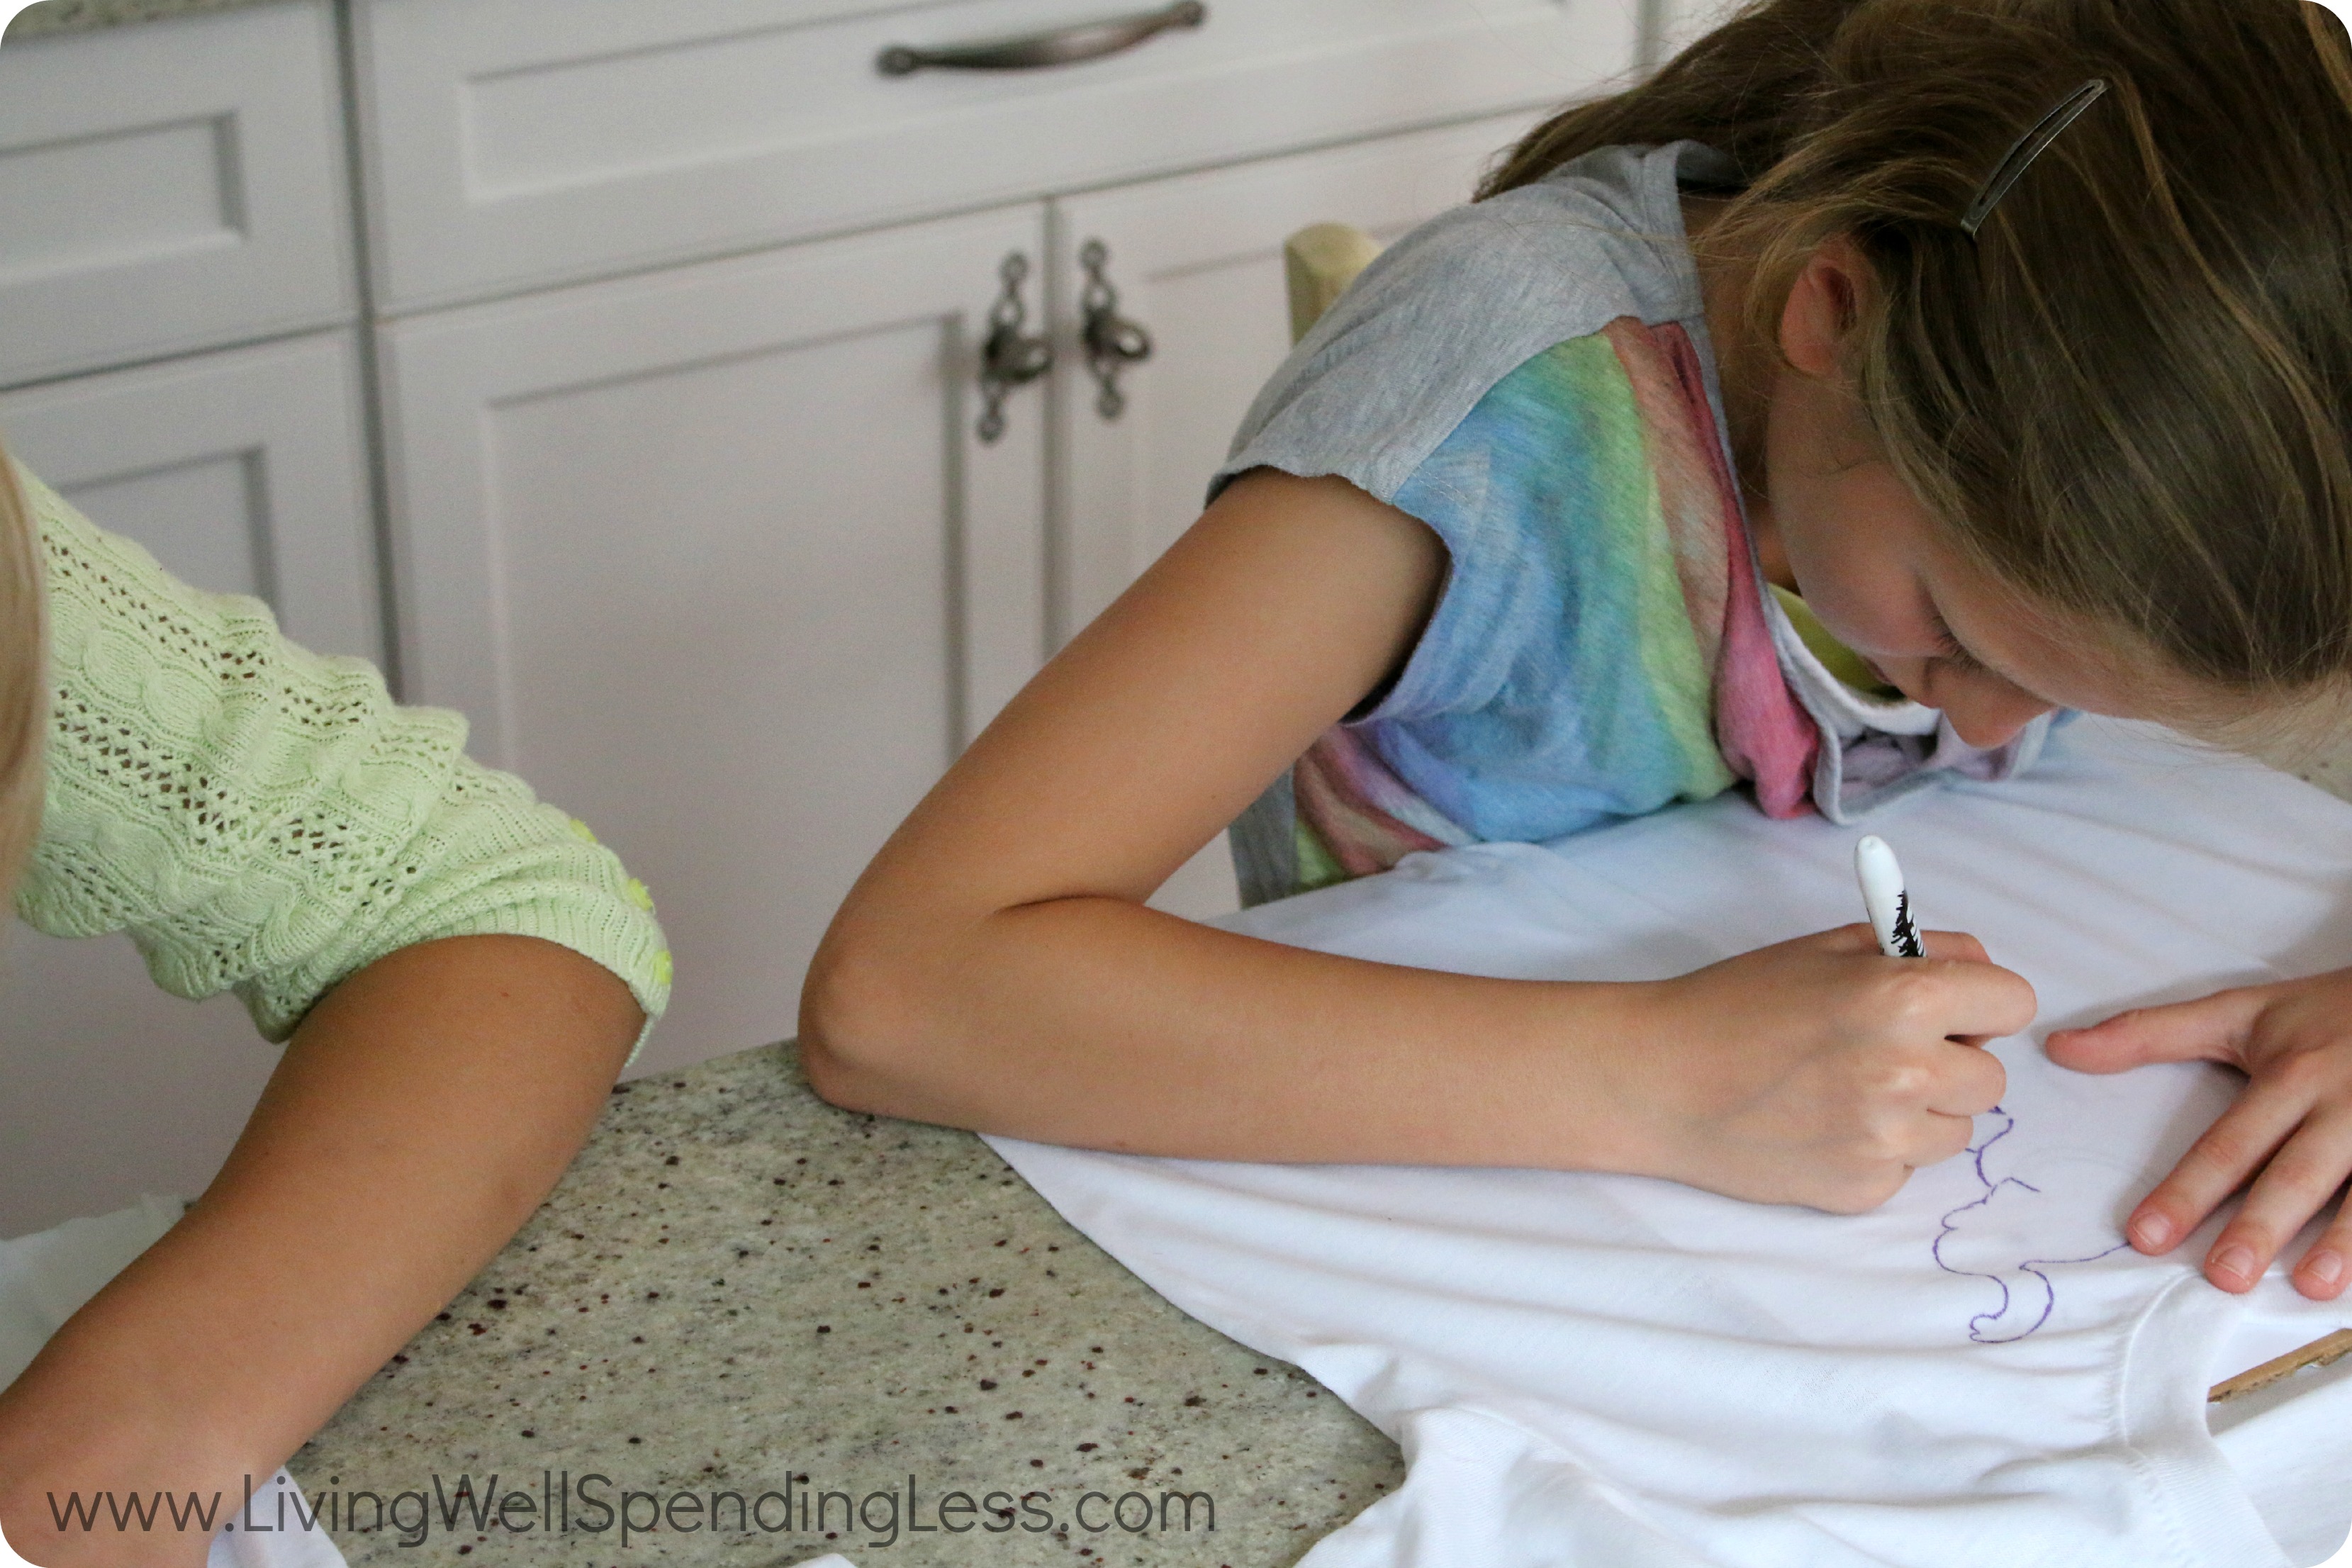 Place the template under the t-shirt and trace the design using the Sharpie markers.